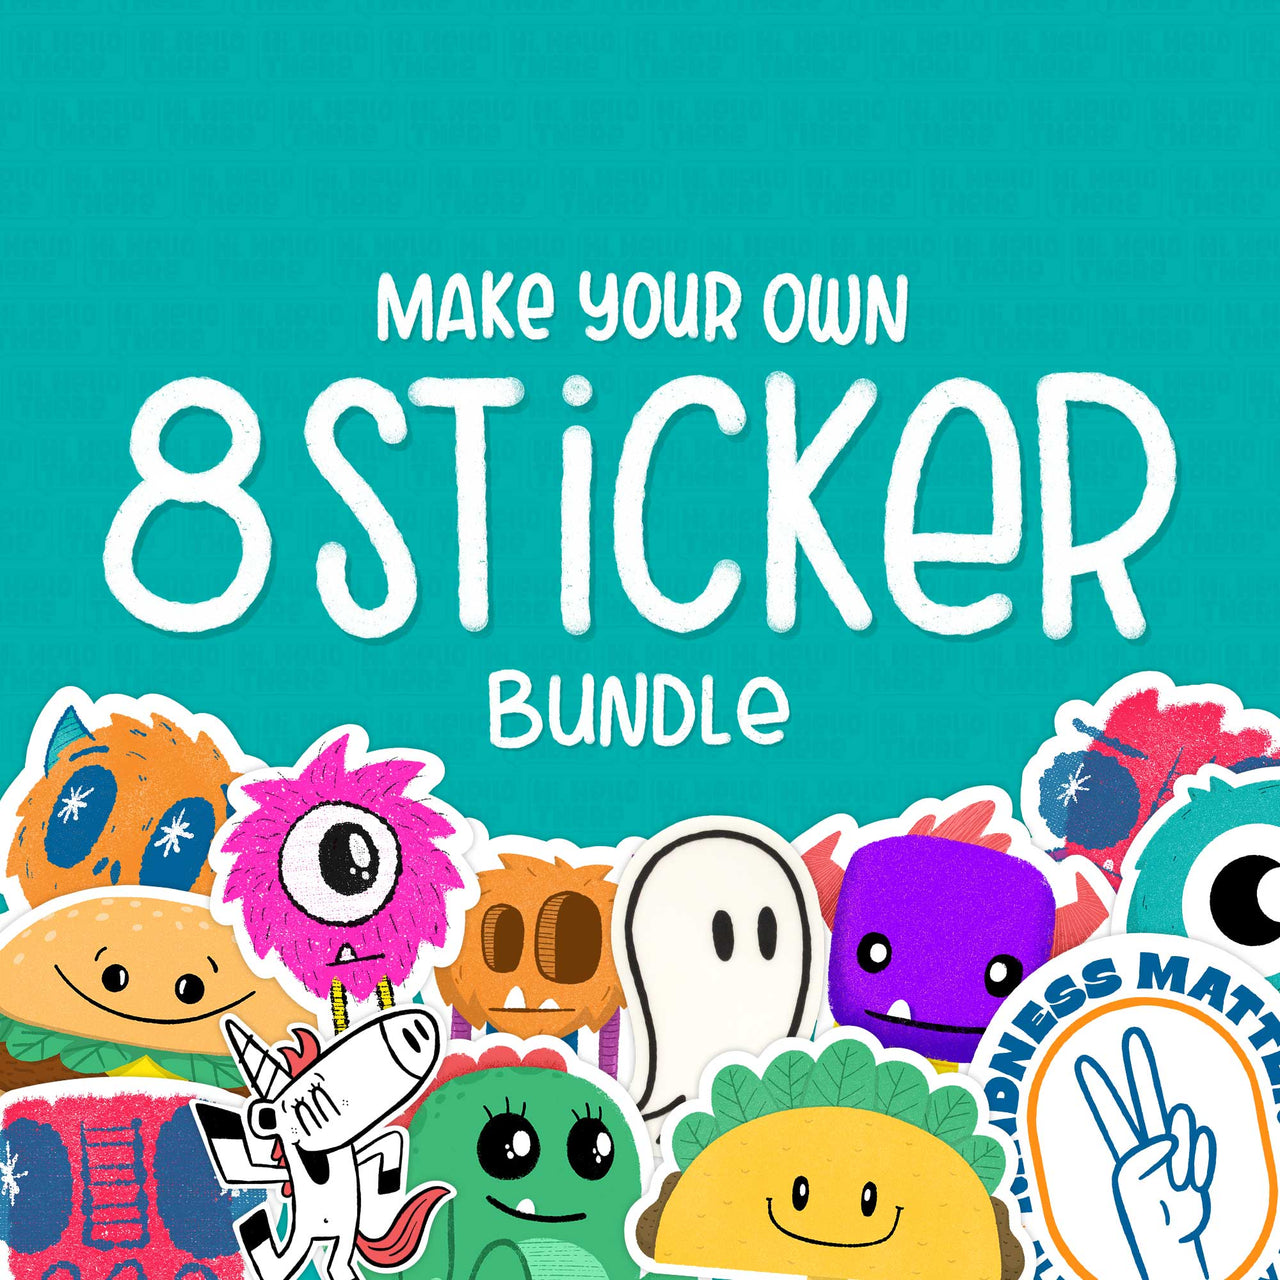 Make Your Own Stickers